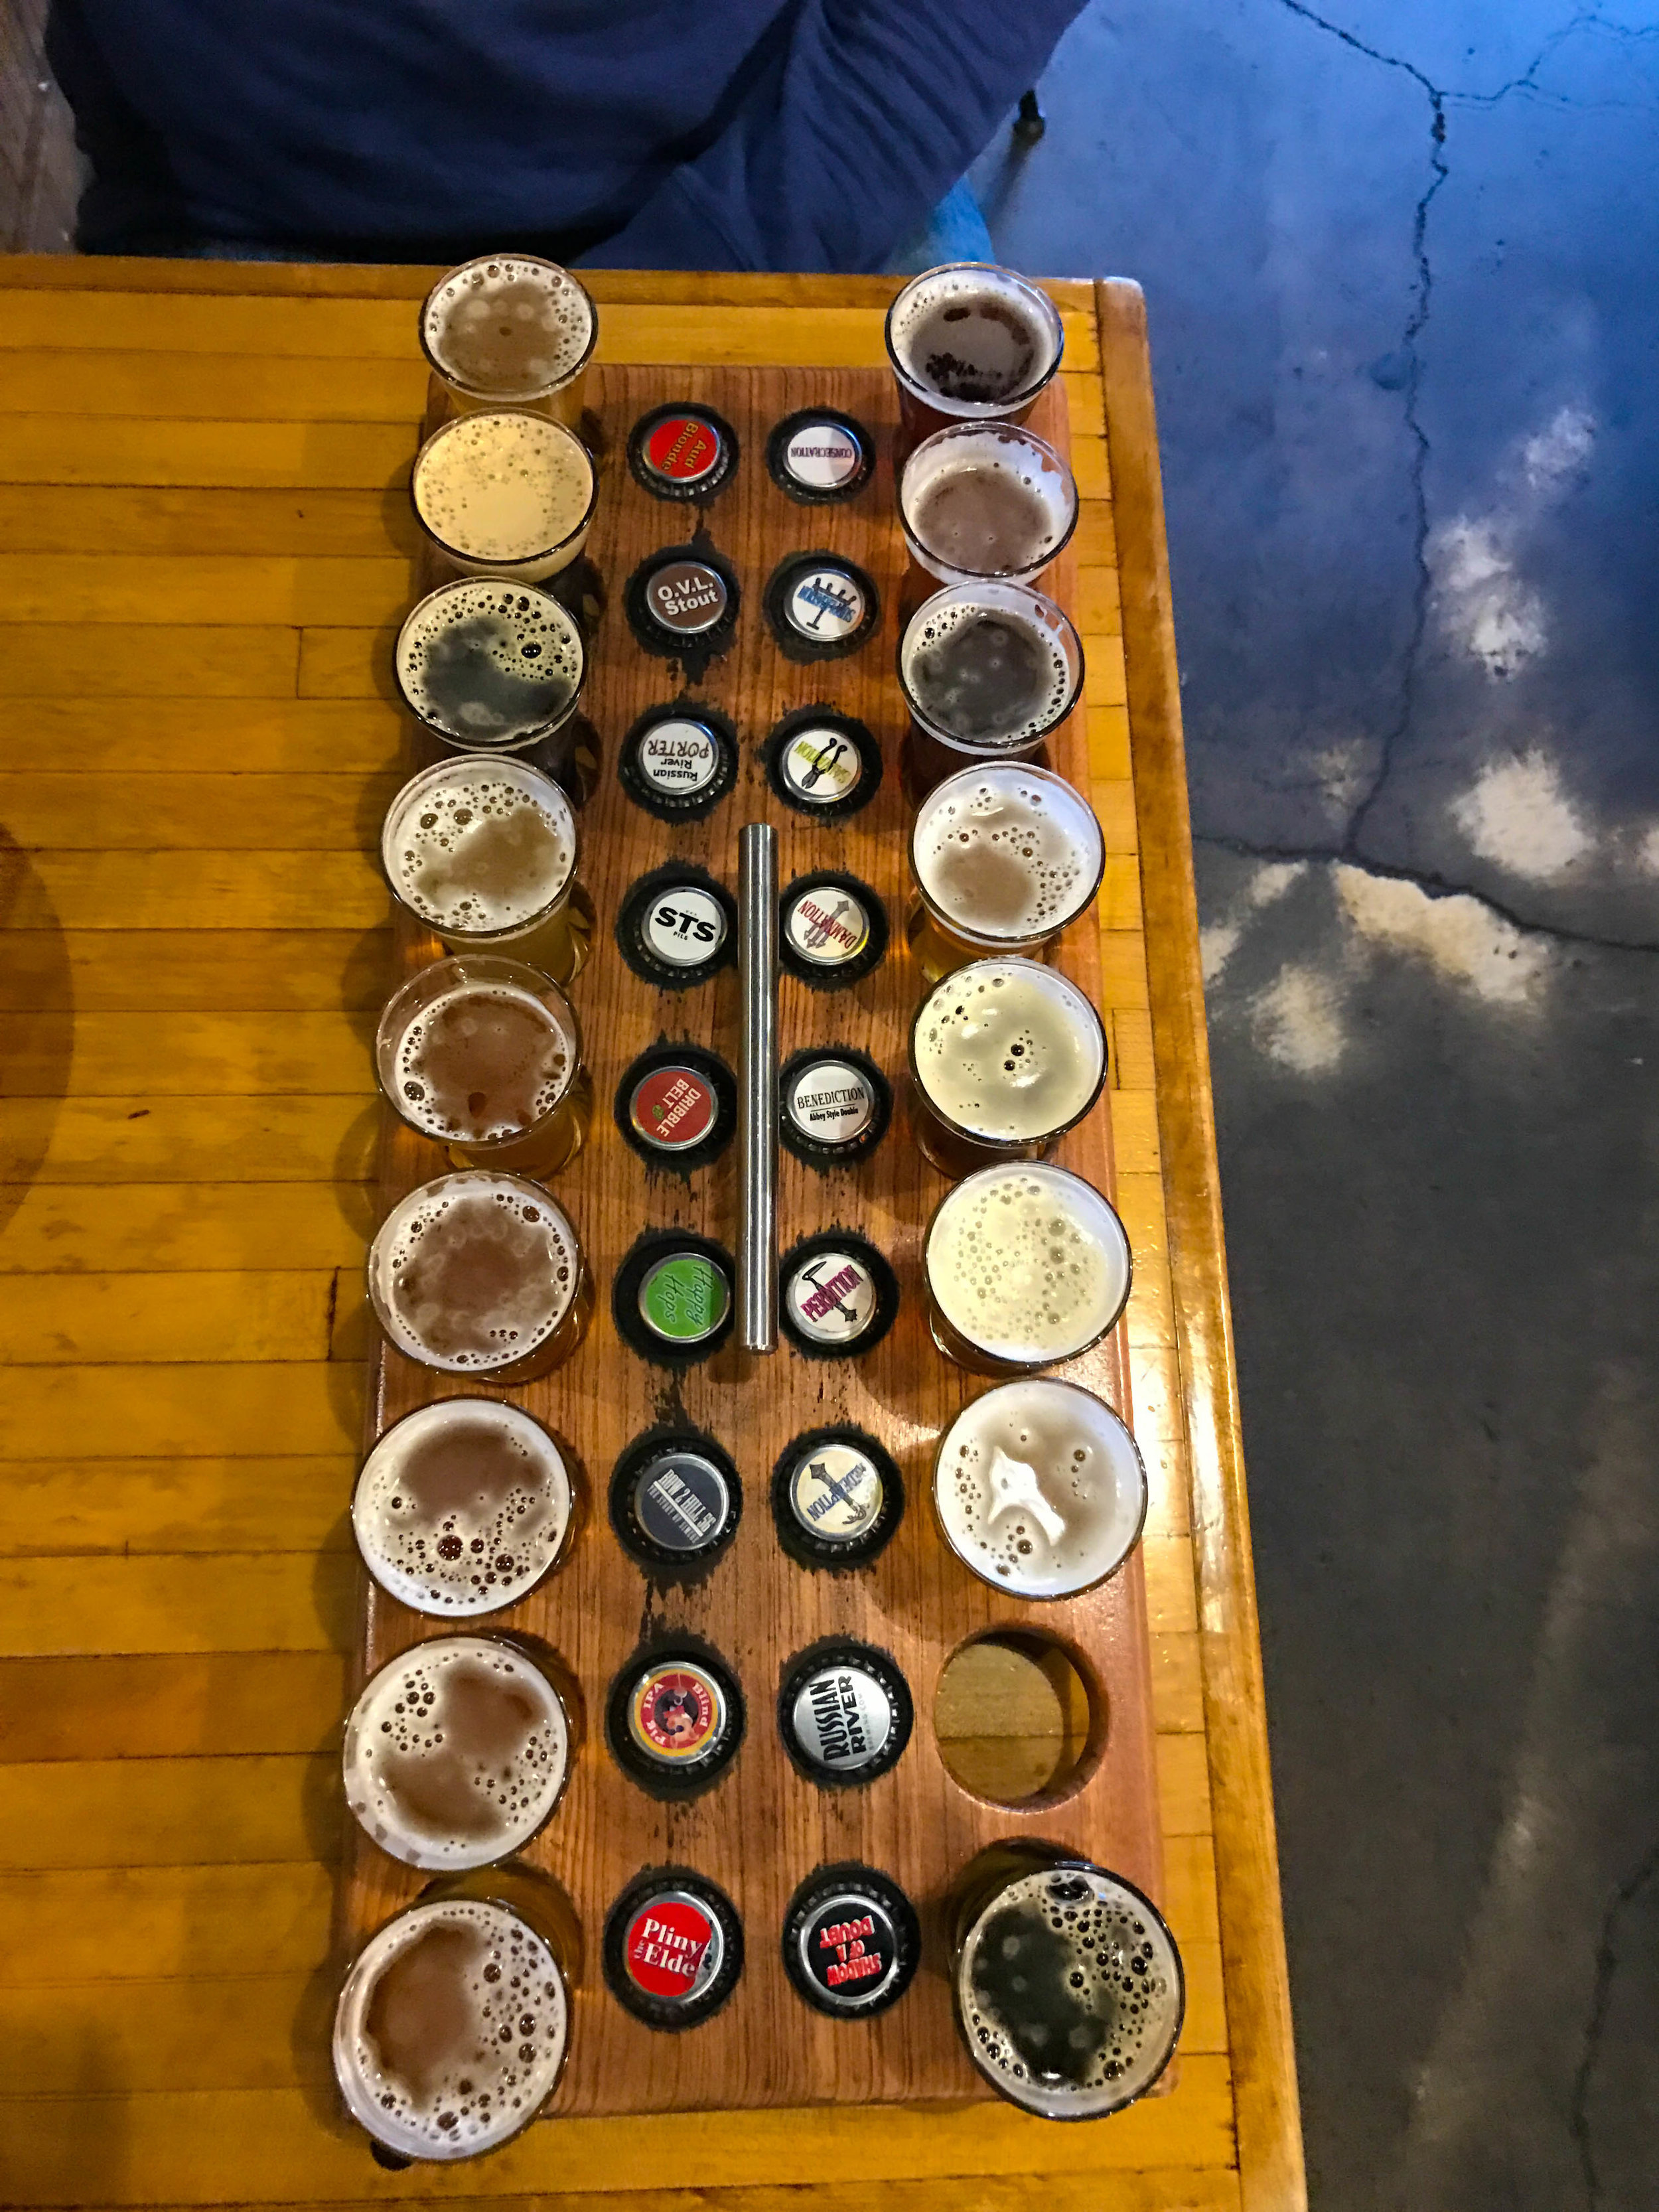 Russian River Brewery Tasters